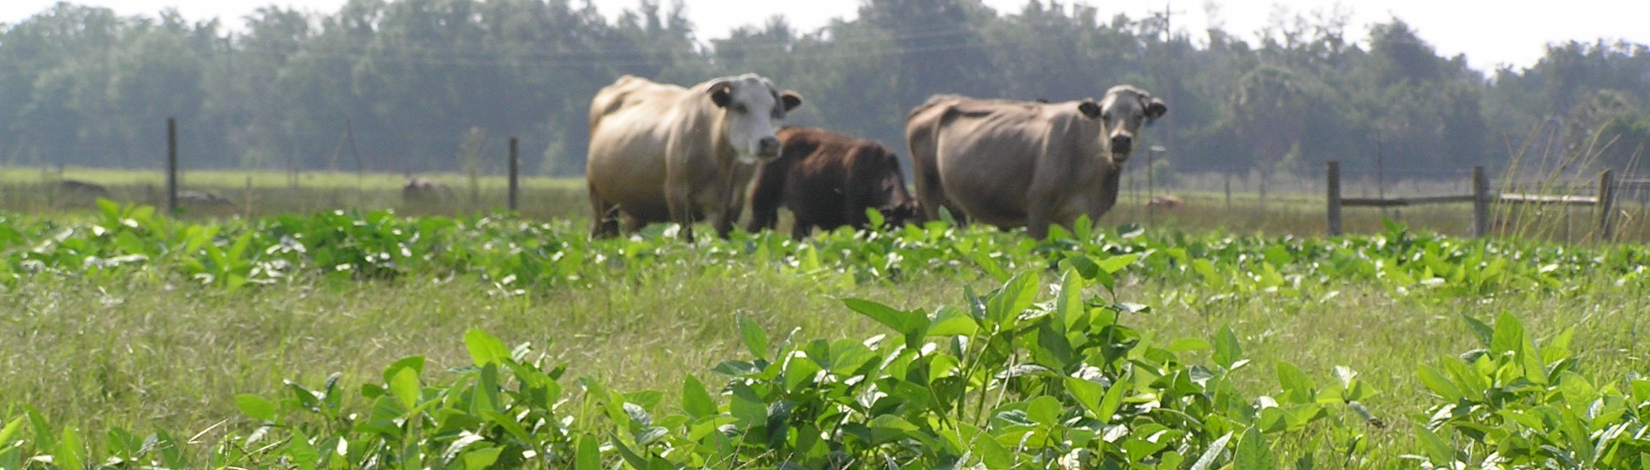 Cows standing in cowpea